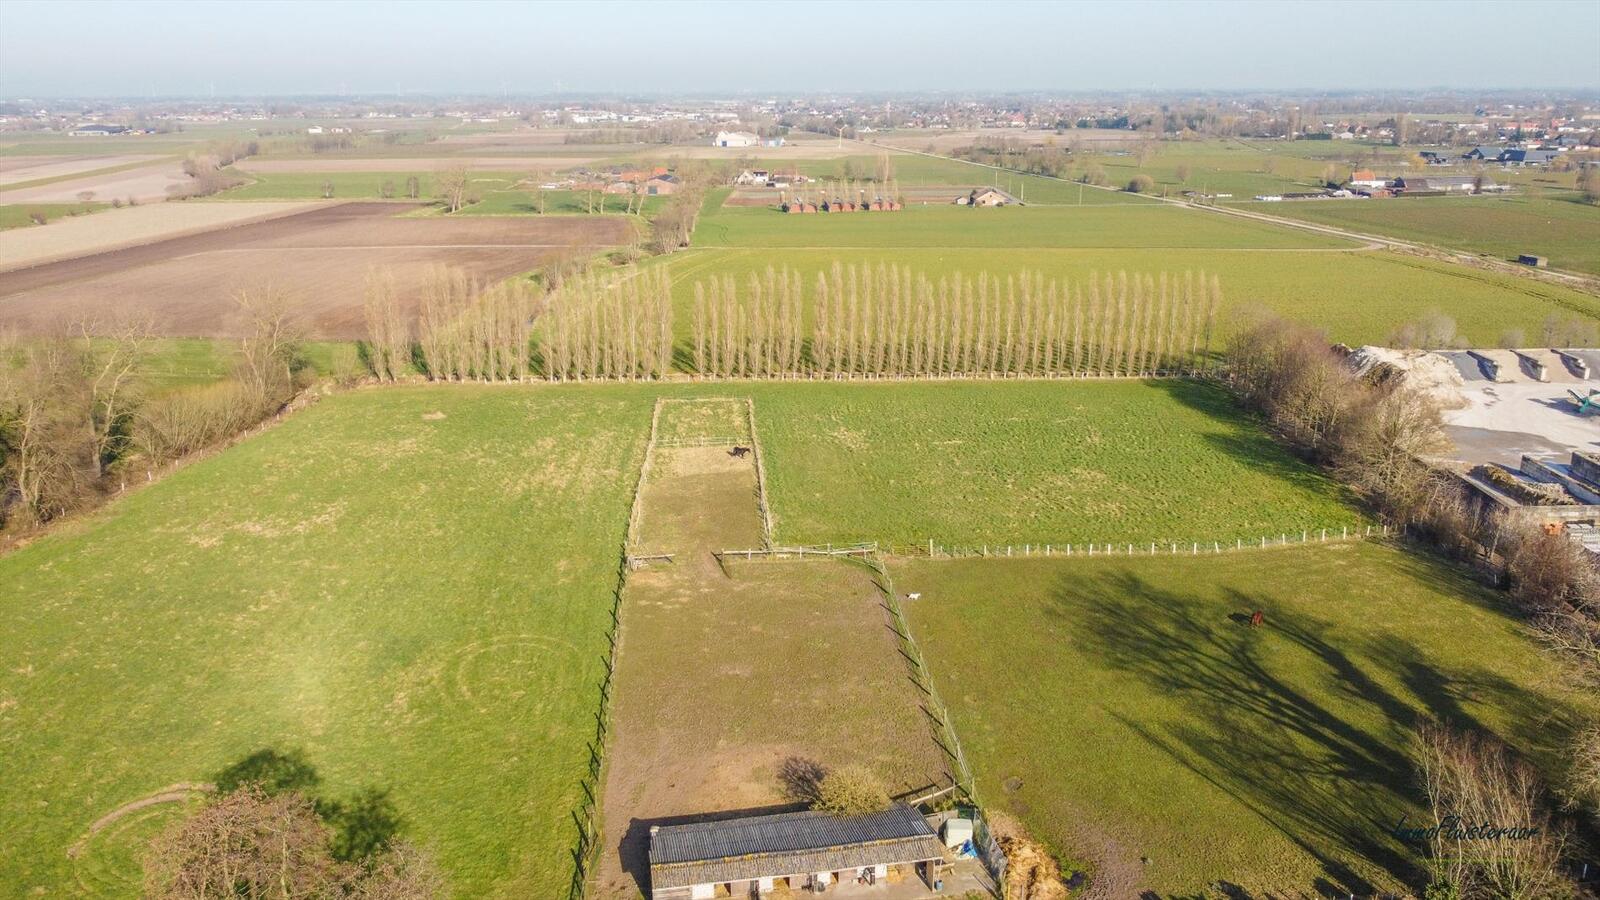 Property for sale |  with option - with restrictions in Ichtegem